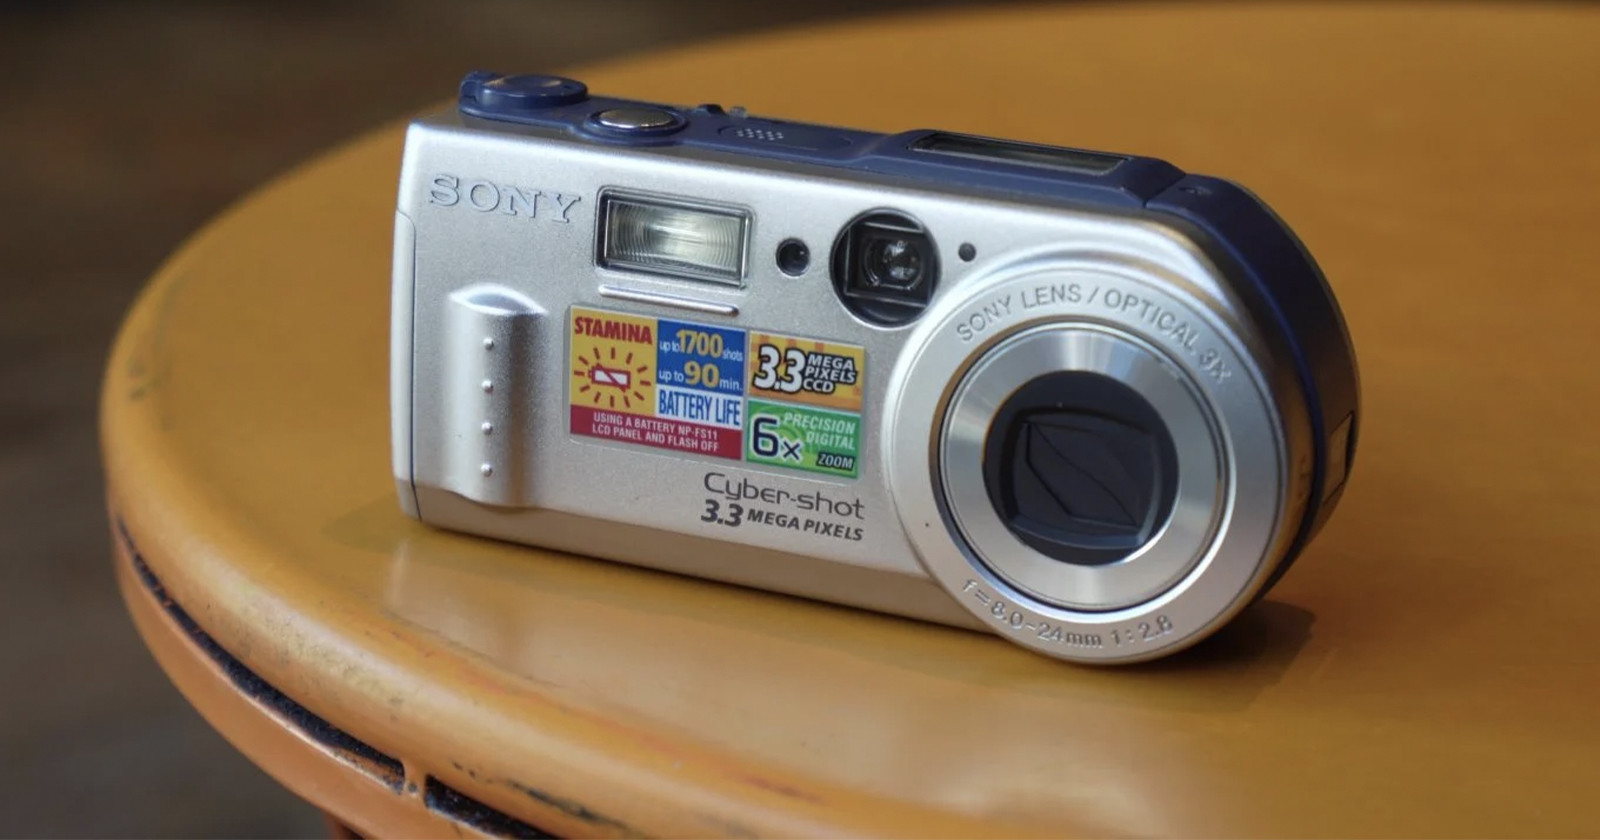 Revisiting the Sony Cyber-shot P1 Camera 22 Years Later